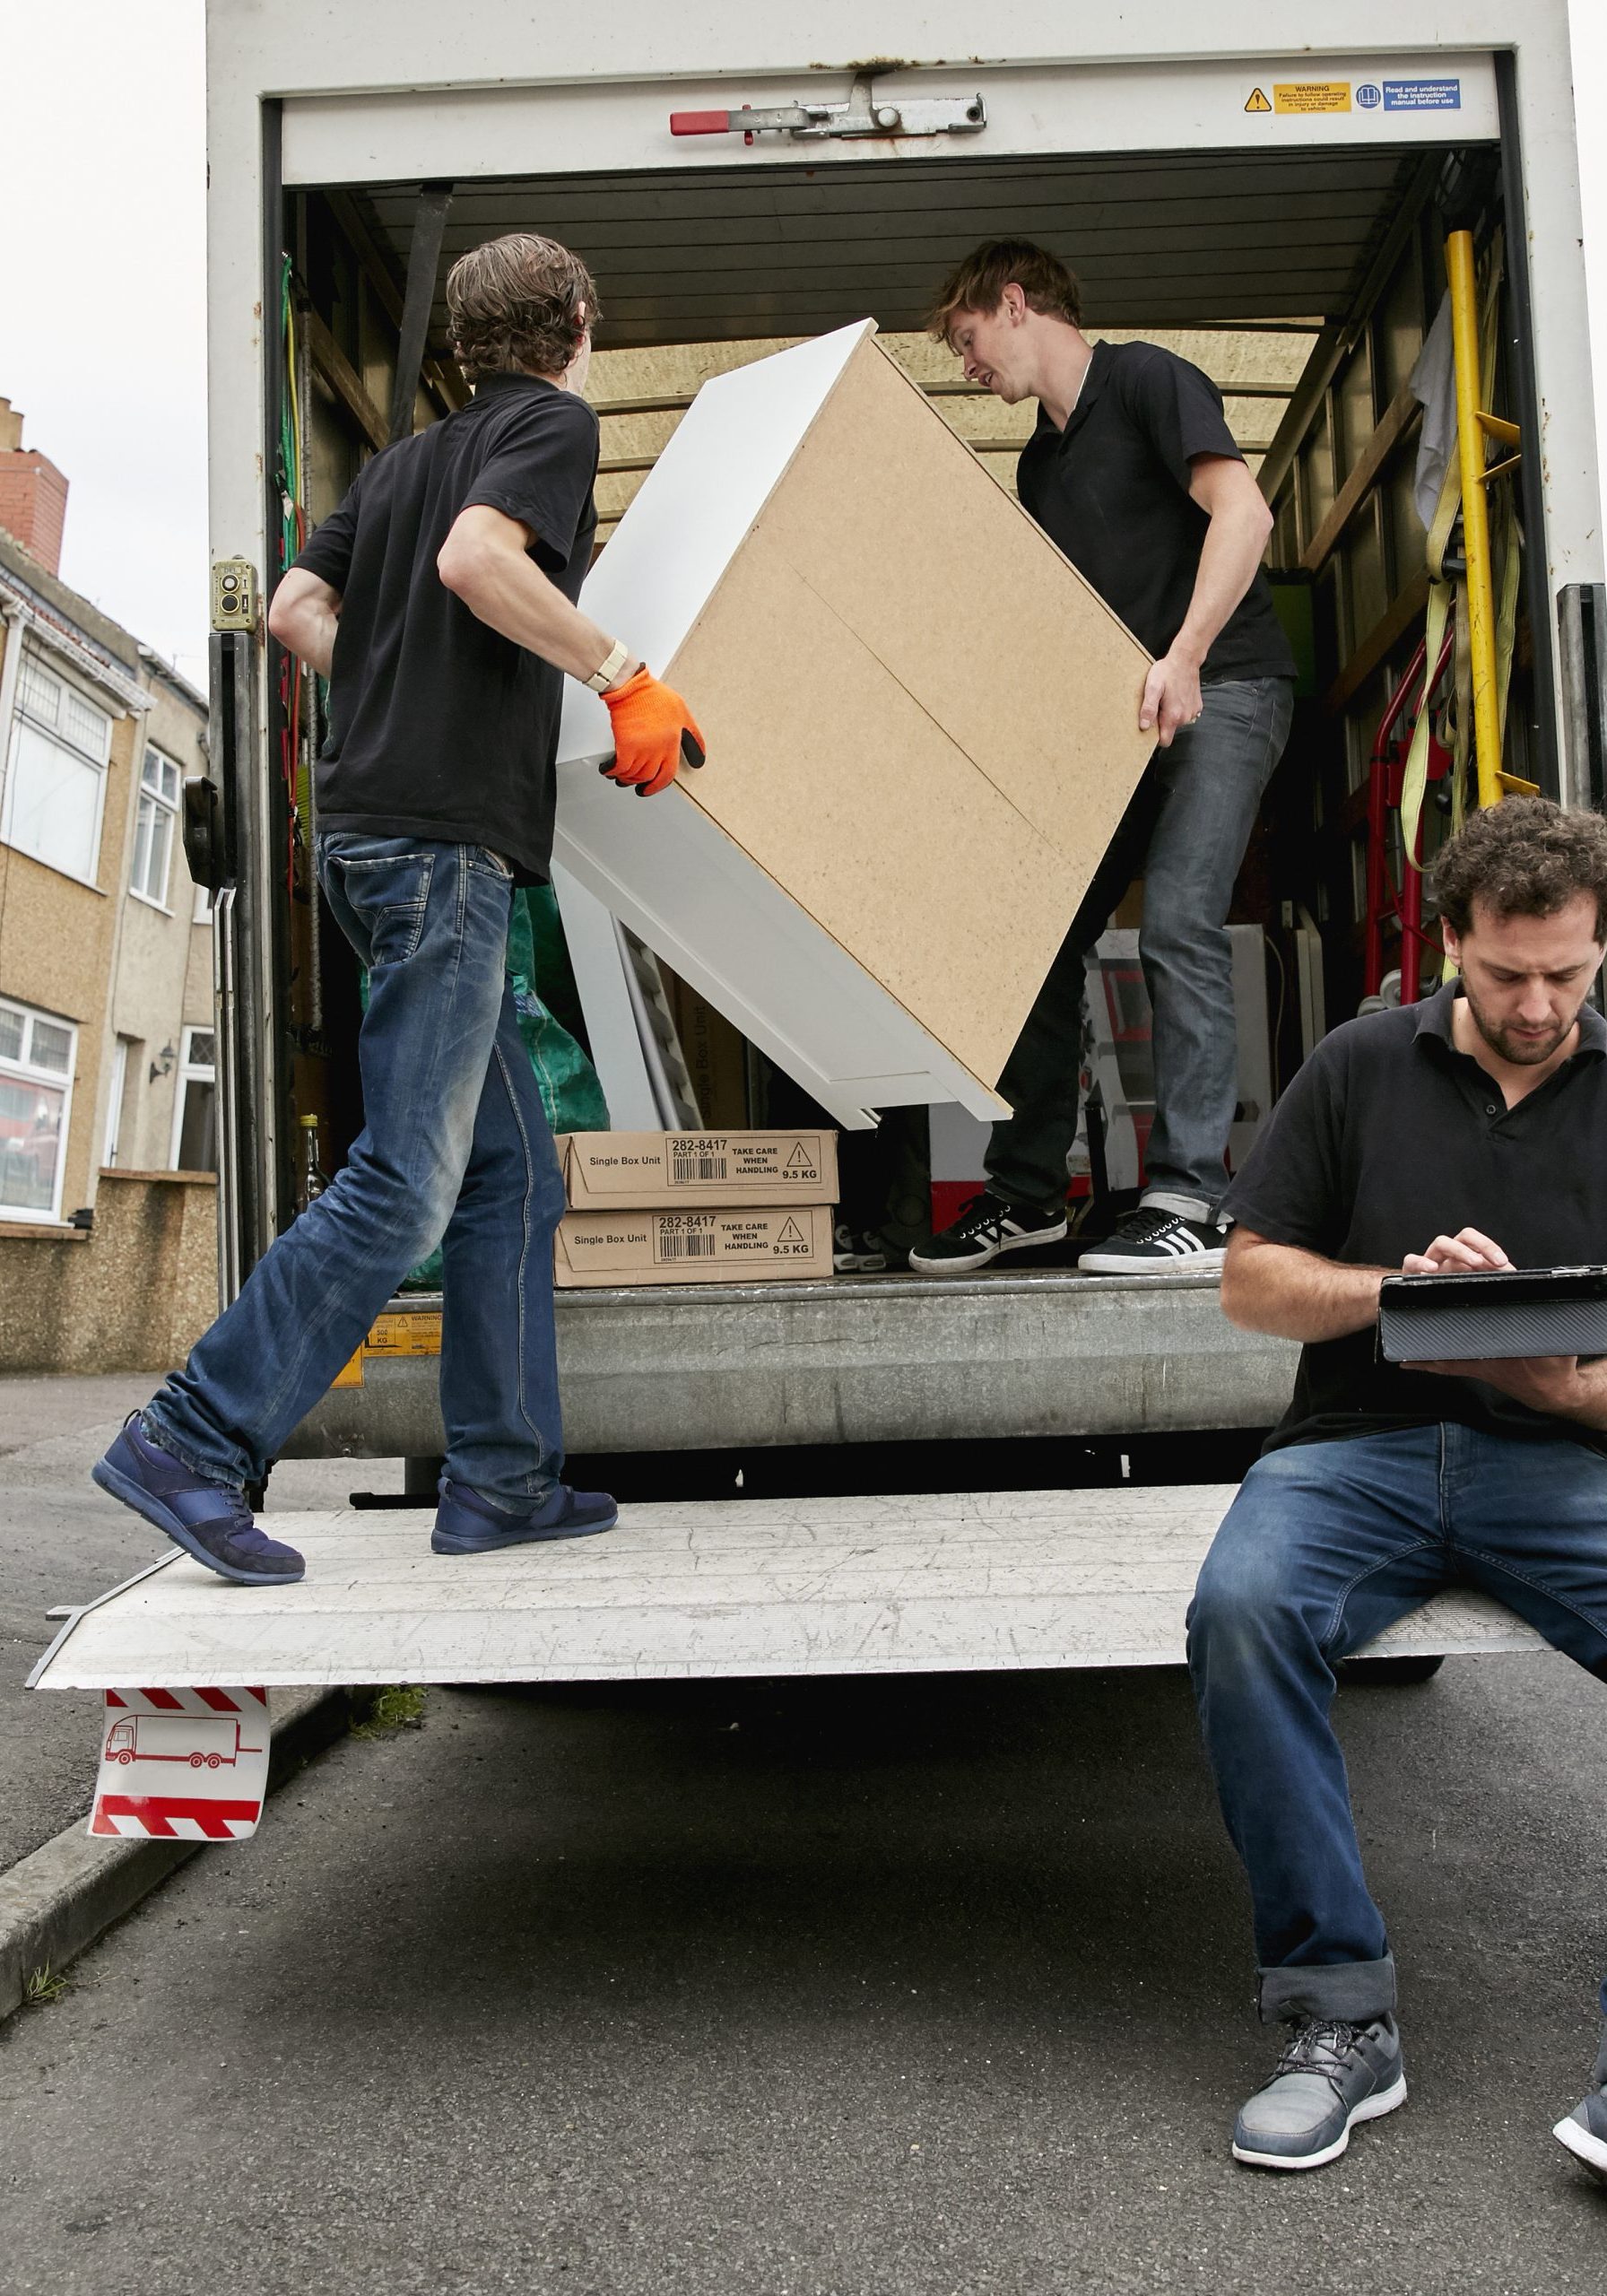 Removals business. A removals company, two men lifting furniture and one seated using a digital tablet.